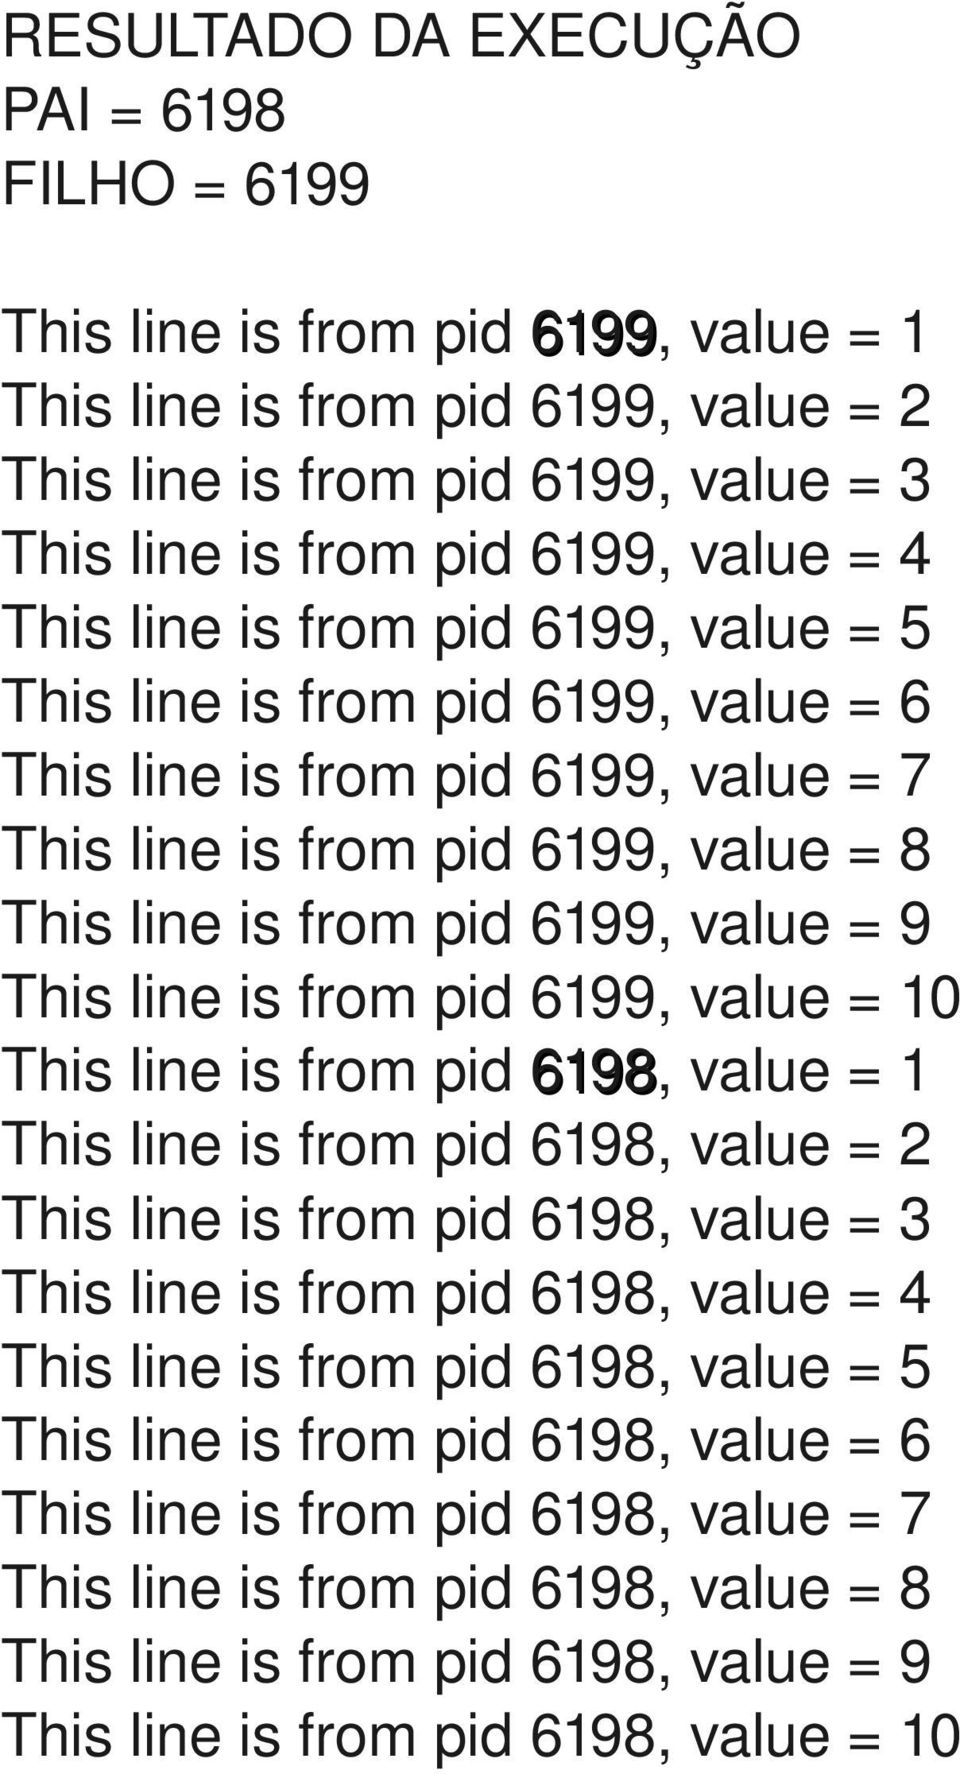 is from pid 6199, value = 10 This line is from pid 6198, value = 1 This line is from pid 6198, value = 2 This line is from pid 6198, value = 3 This line is from pid 6198, value = 4 This line is from